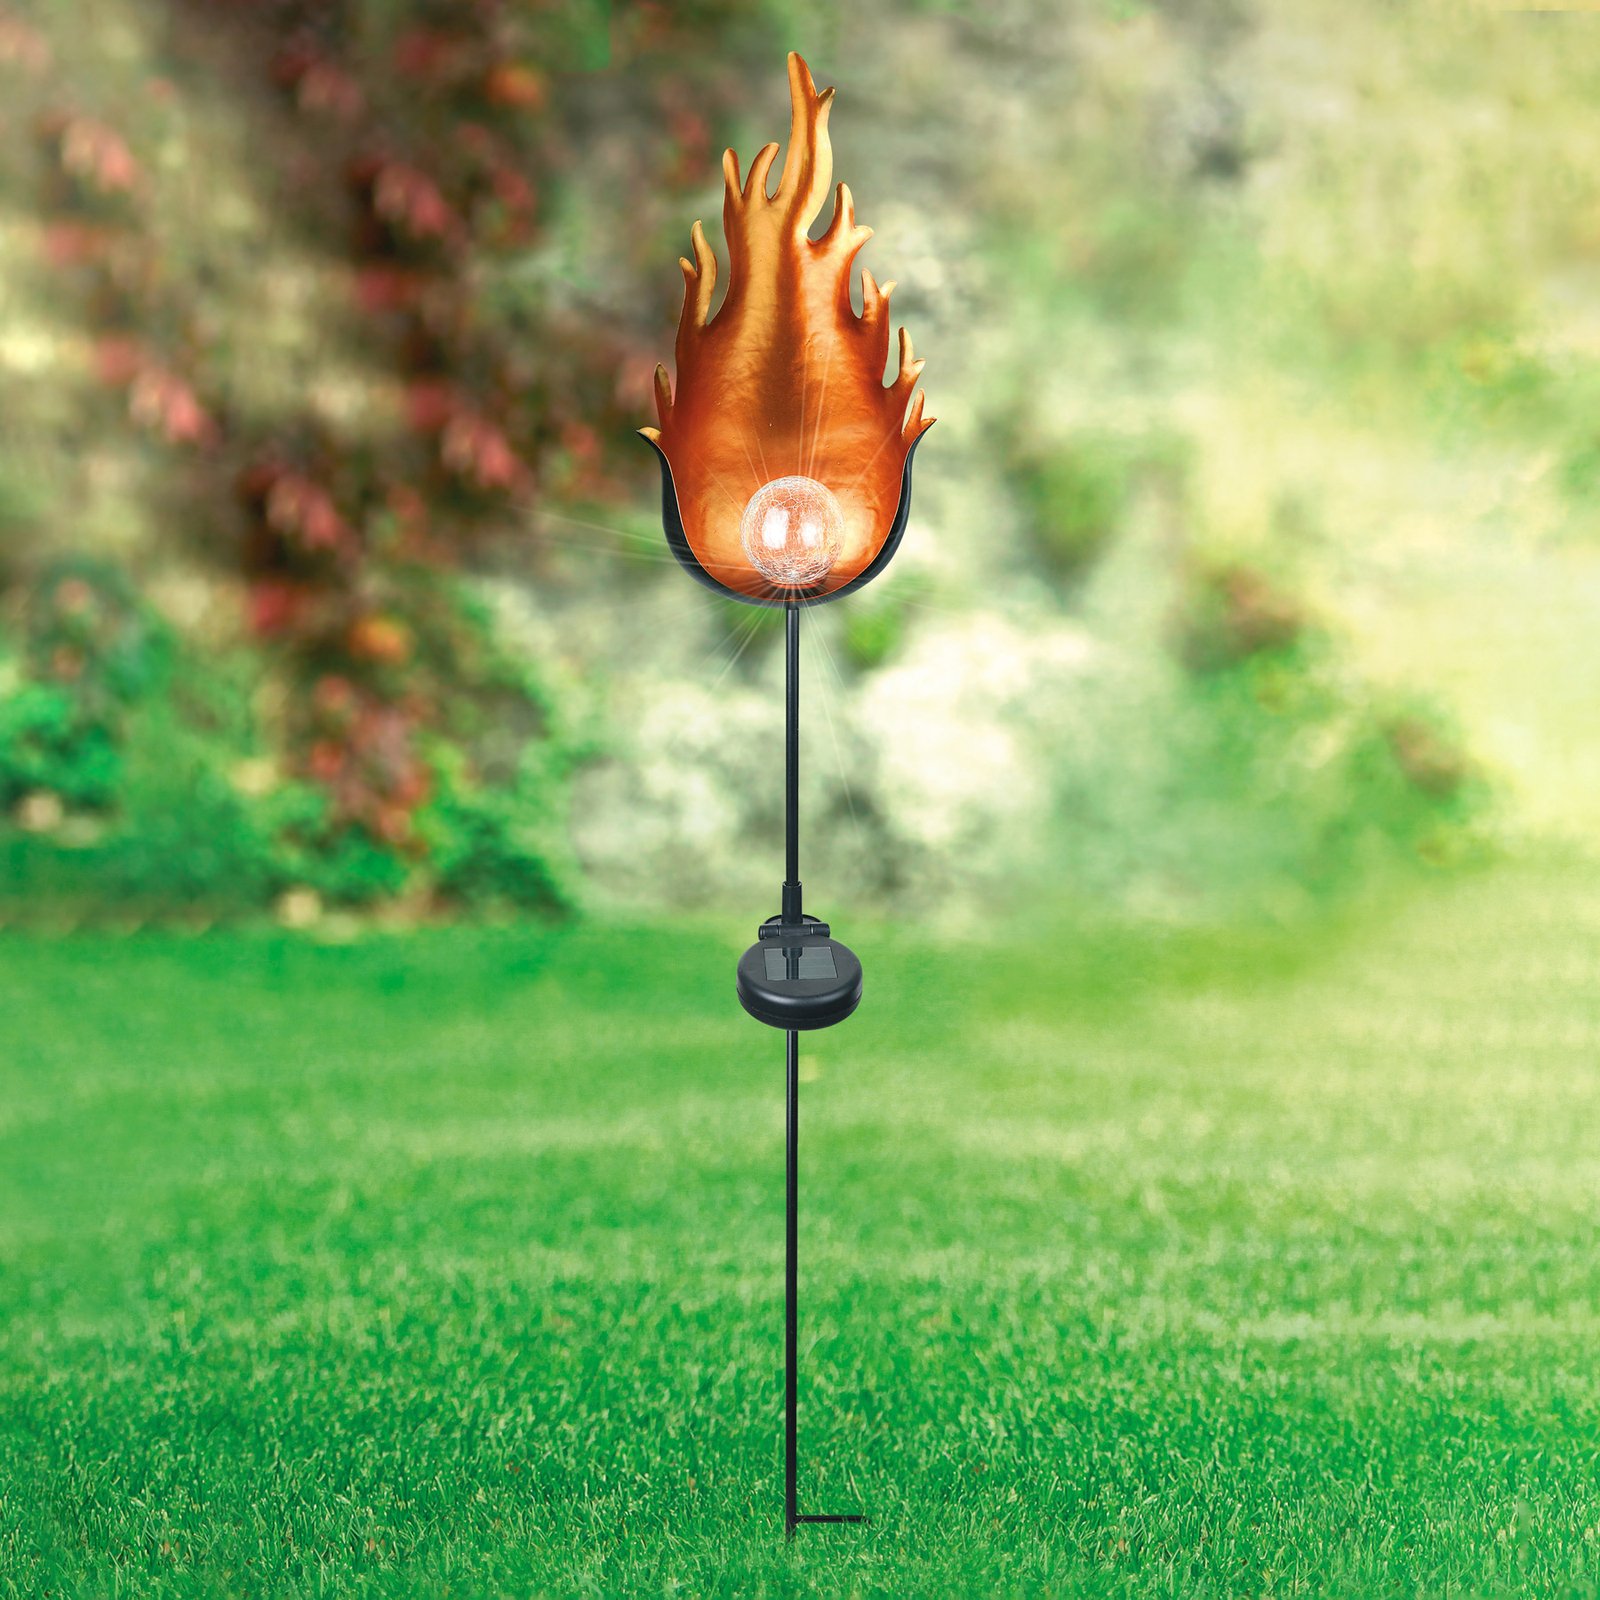 LED solar light 33472 with a metal flame